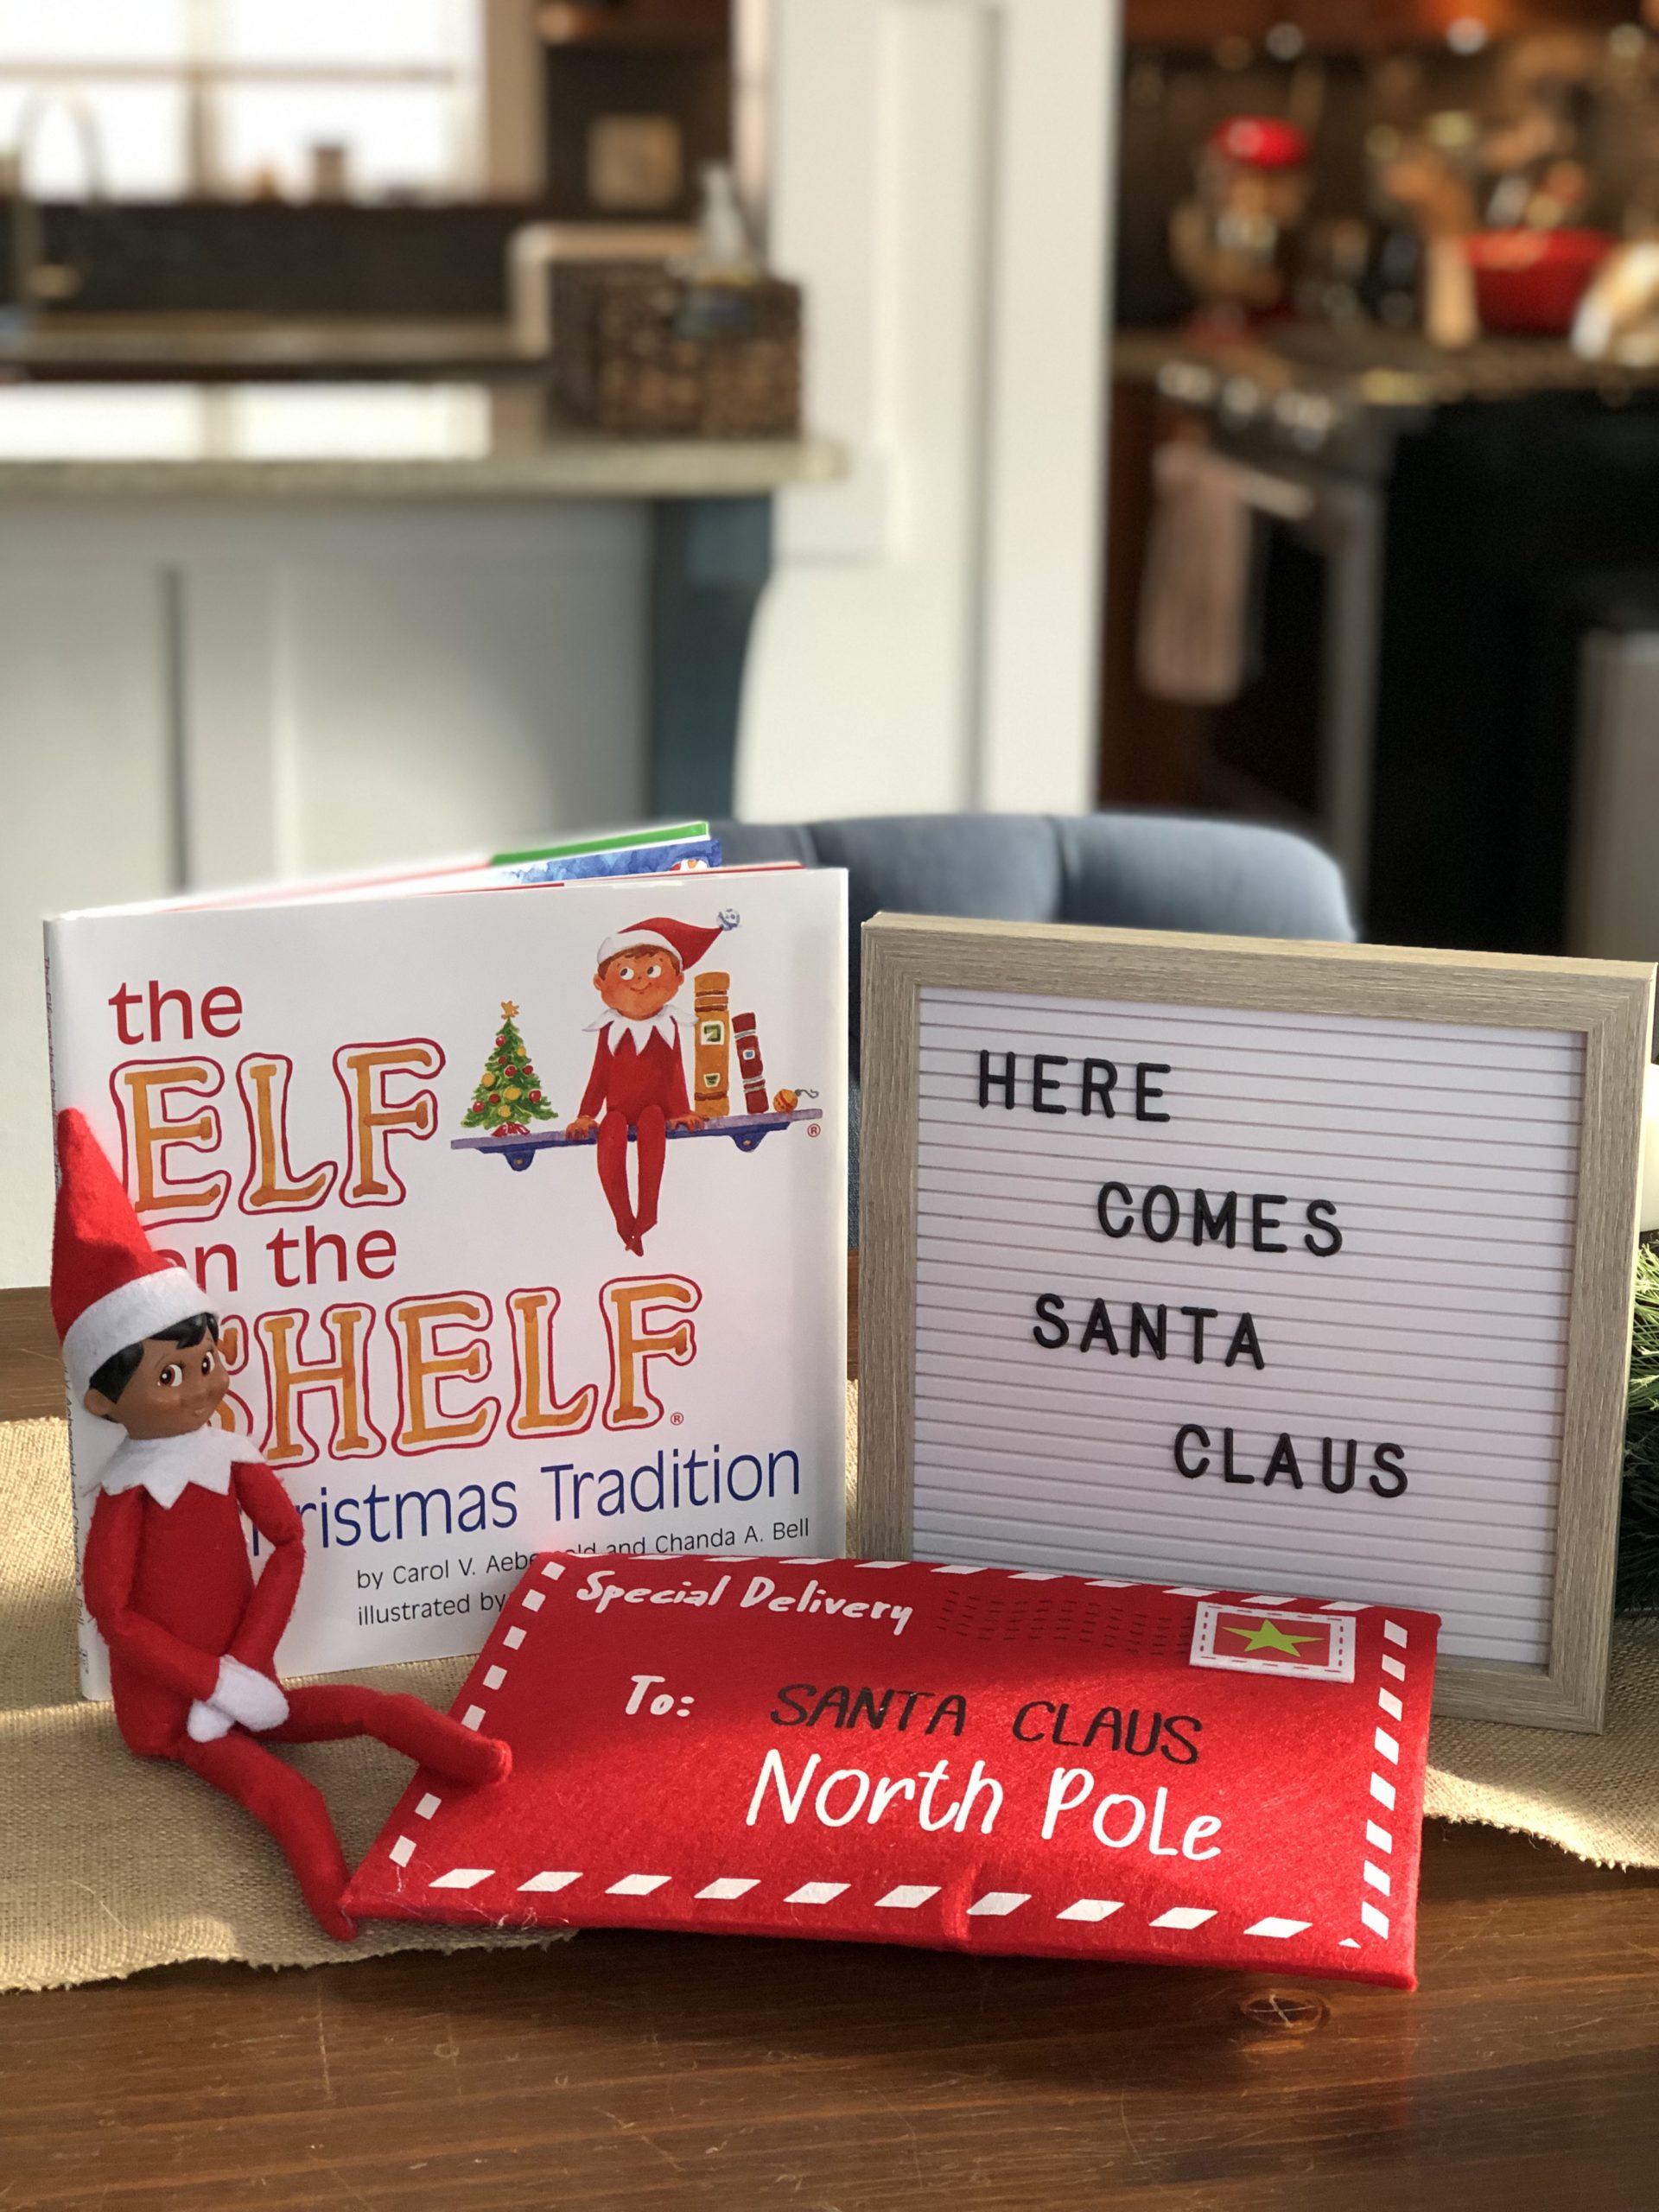 The Elf on the Shelf was a lot harder to get to your shelf this year